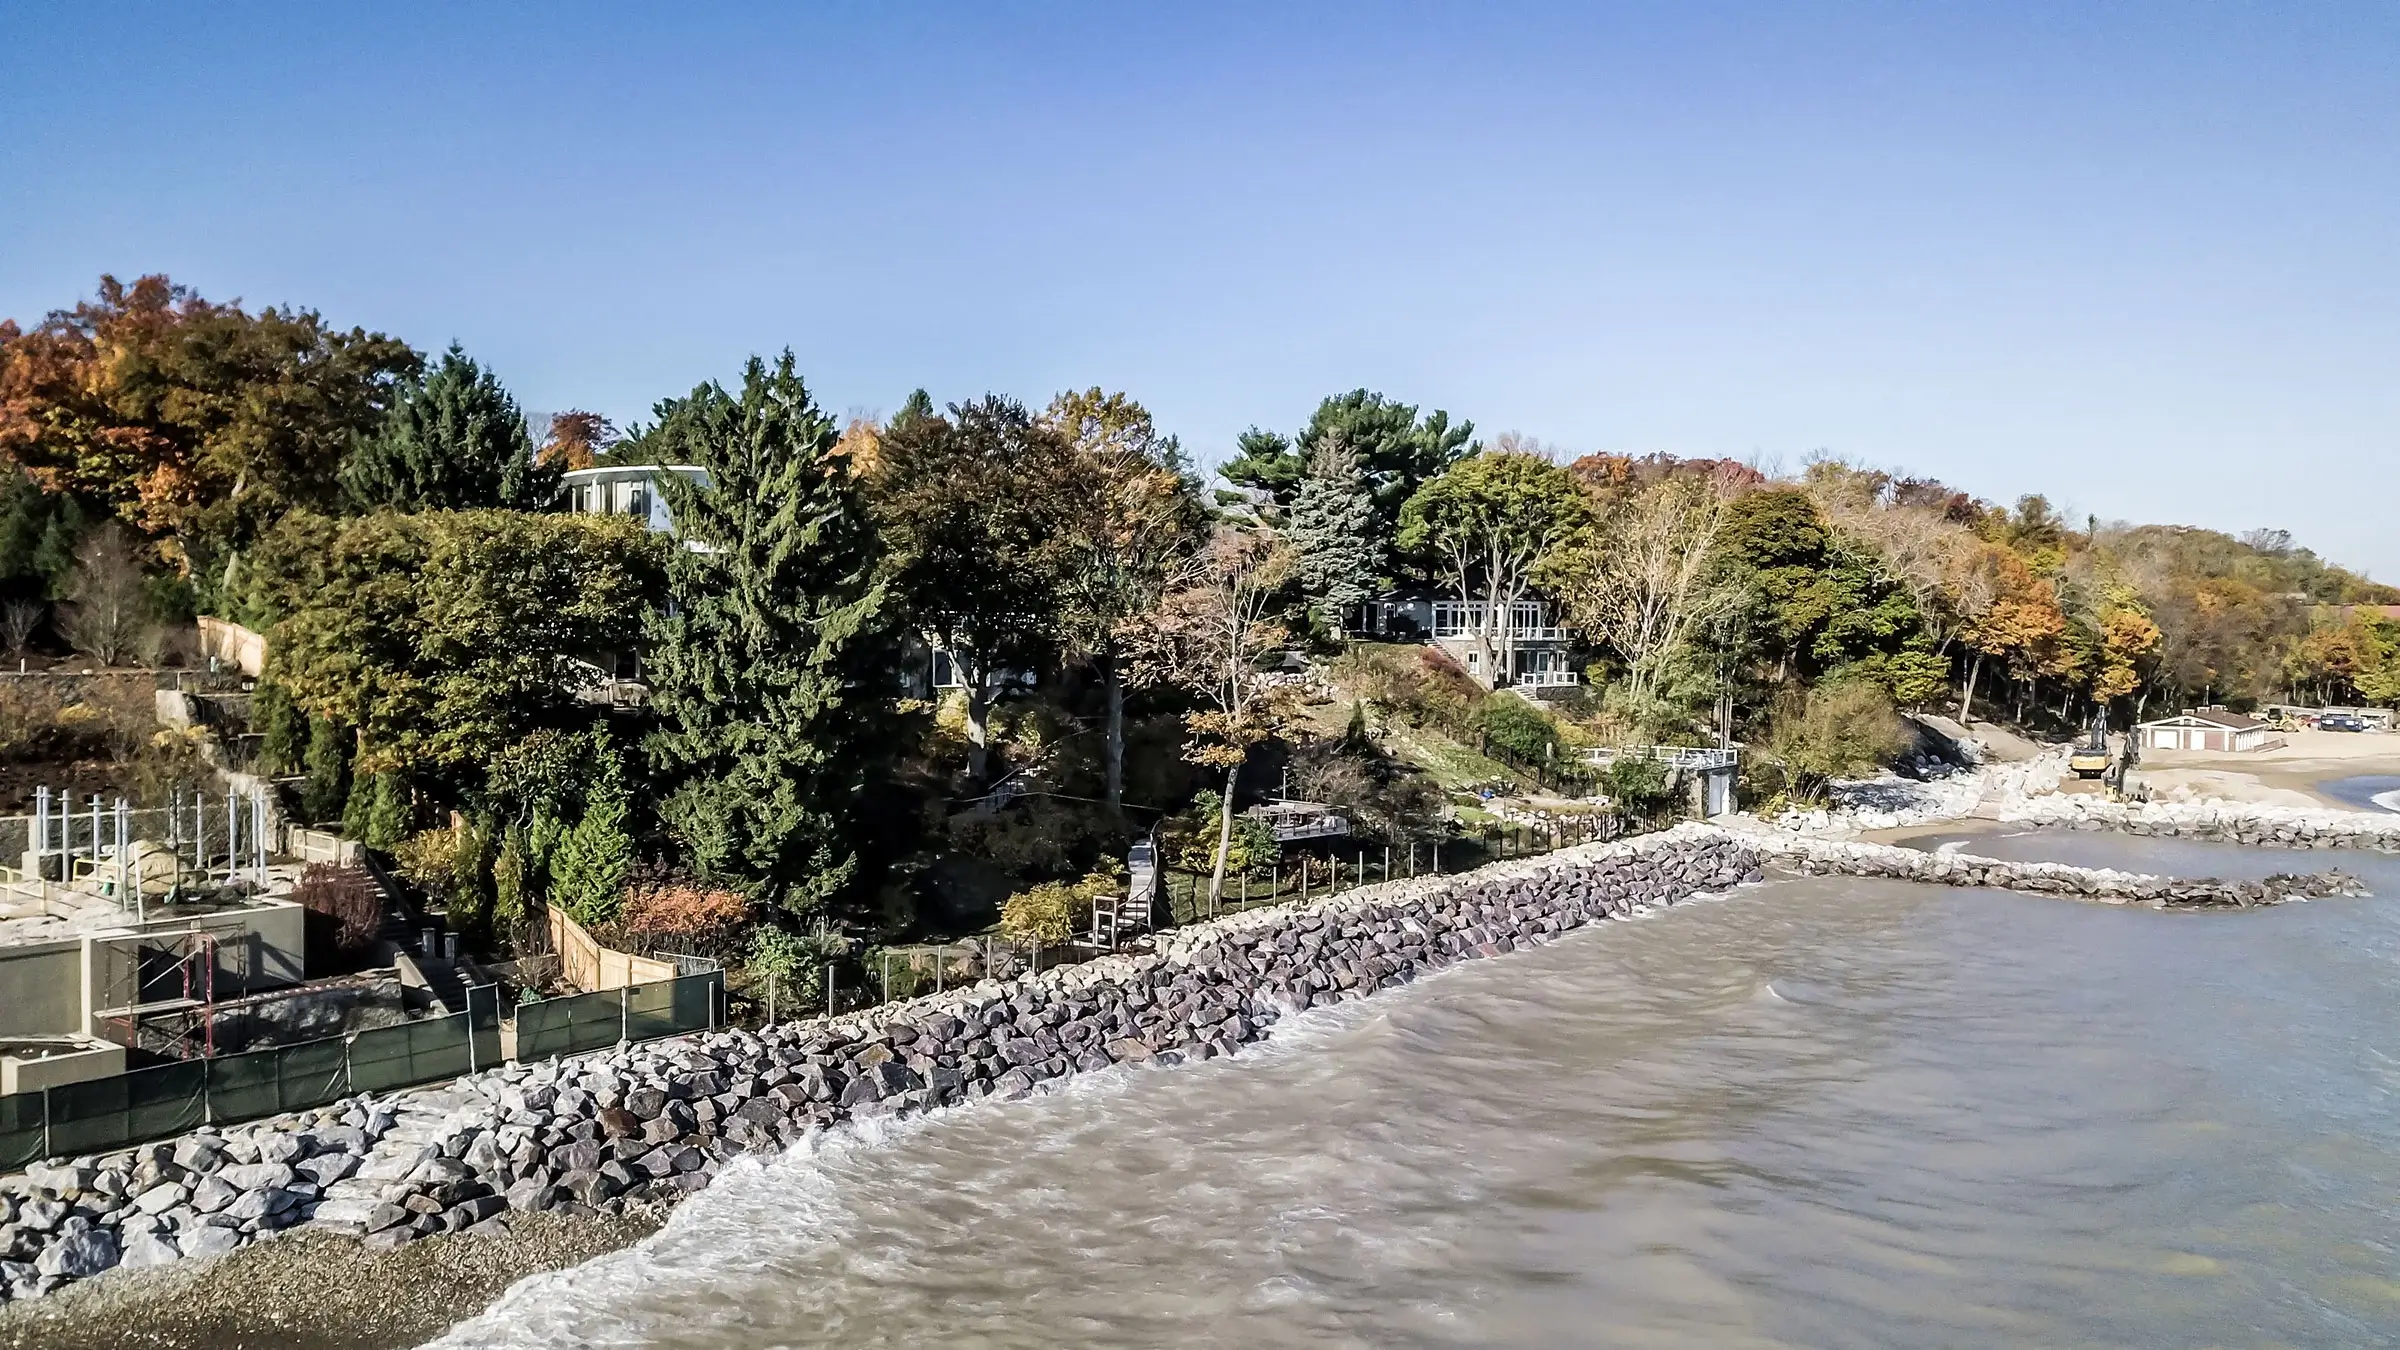 A revetment wall consisting on large stones sits along a shoreline near homes.